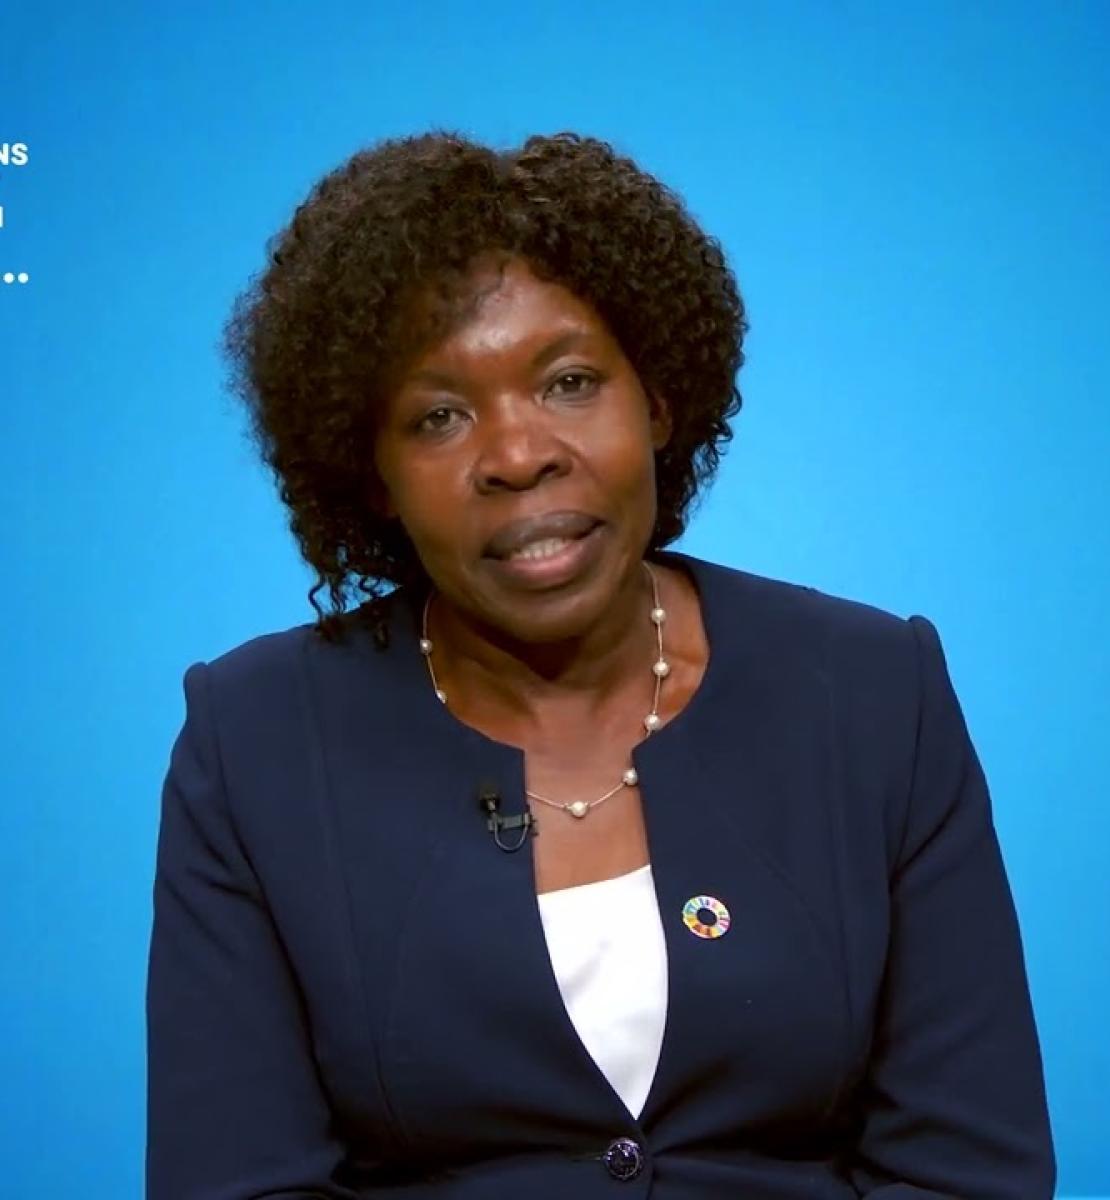 Screenshot from video message shows Resident Coordinator, Beatrice Mutali